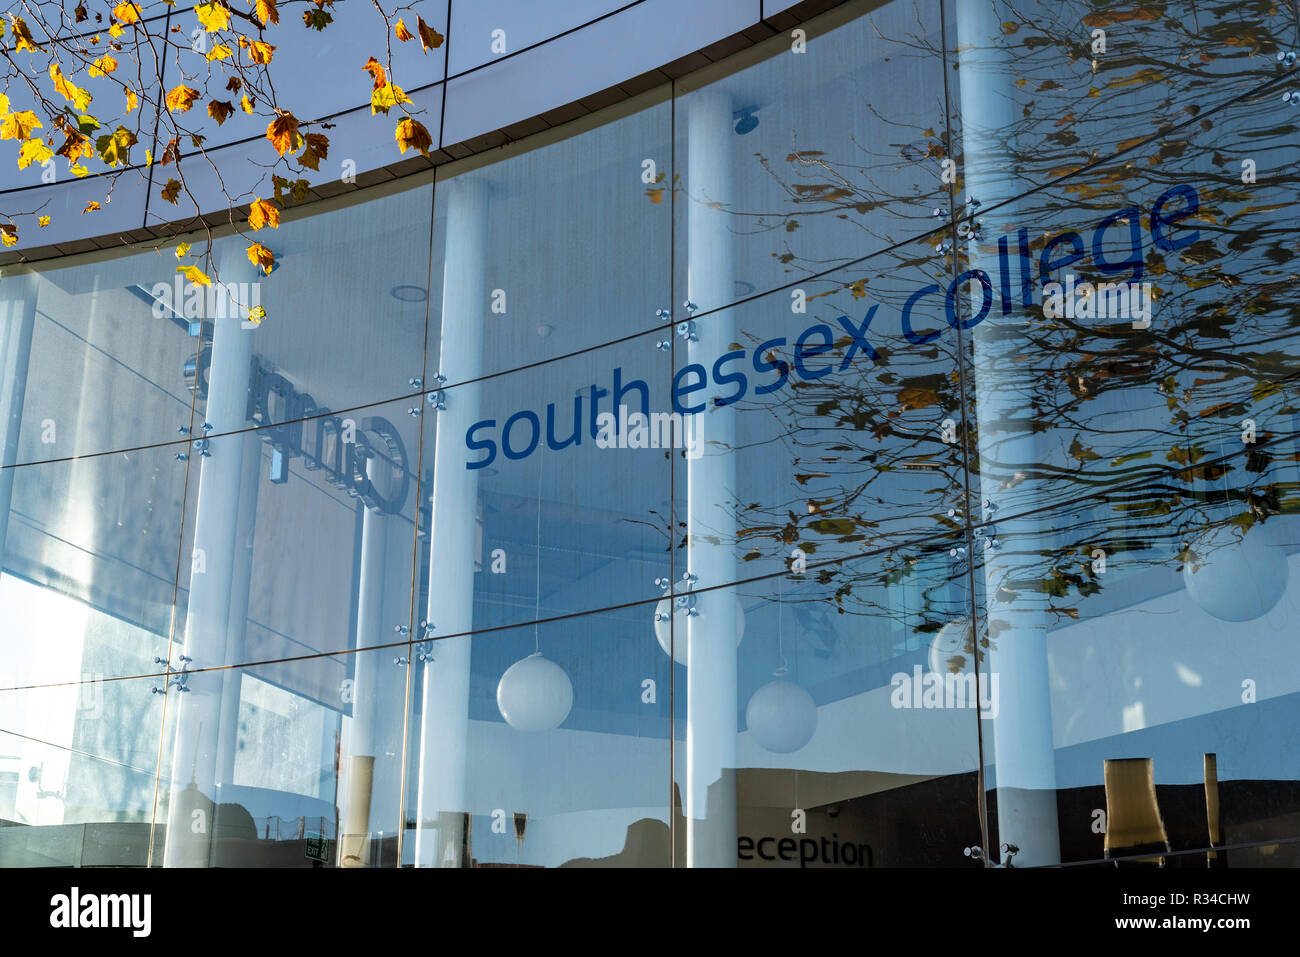 University of Essex, South Essex College, campus architecture, modern seat of learning. Stock Photo